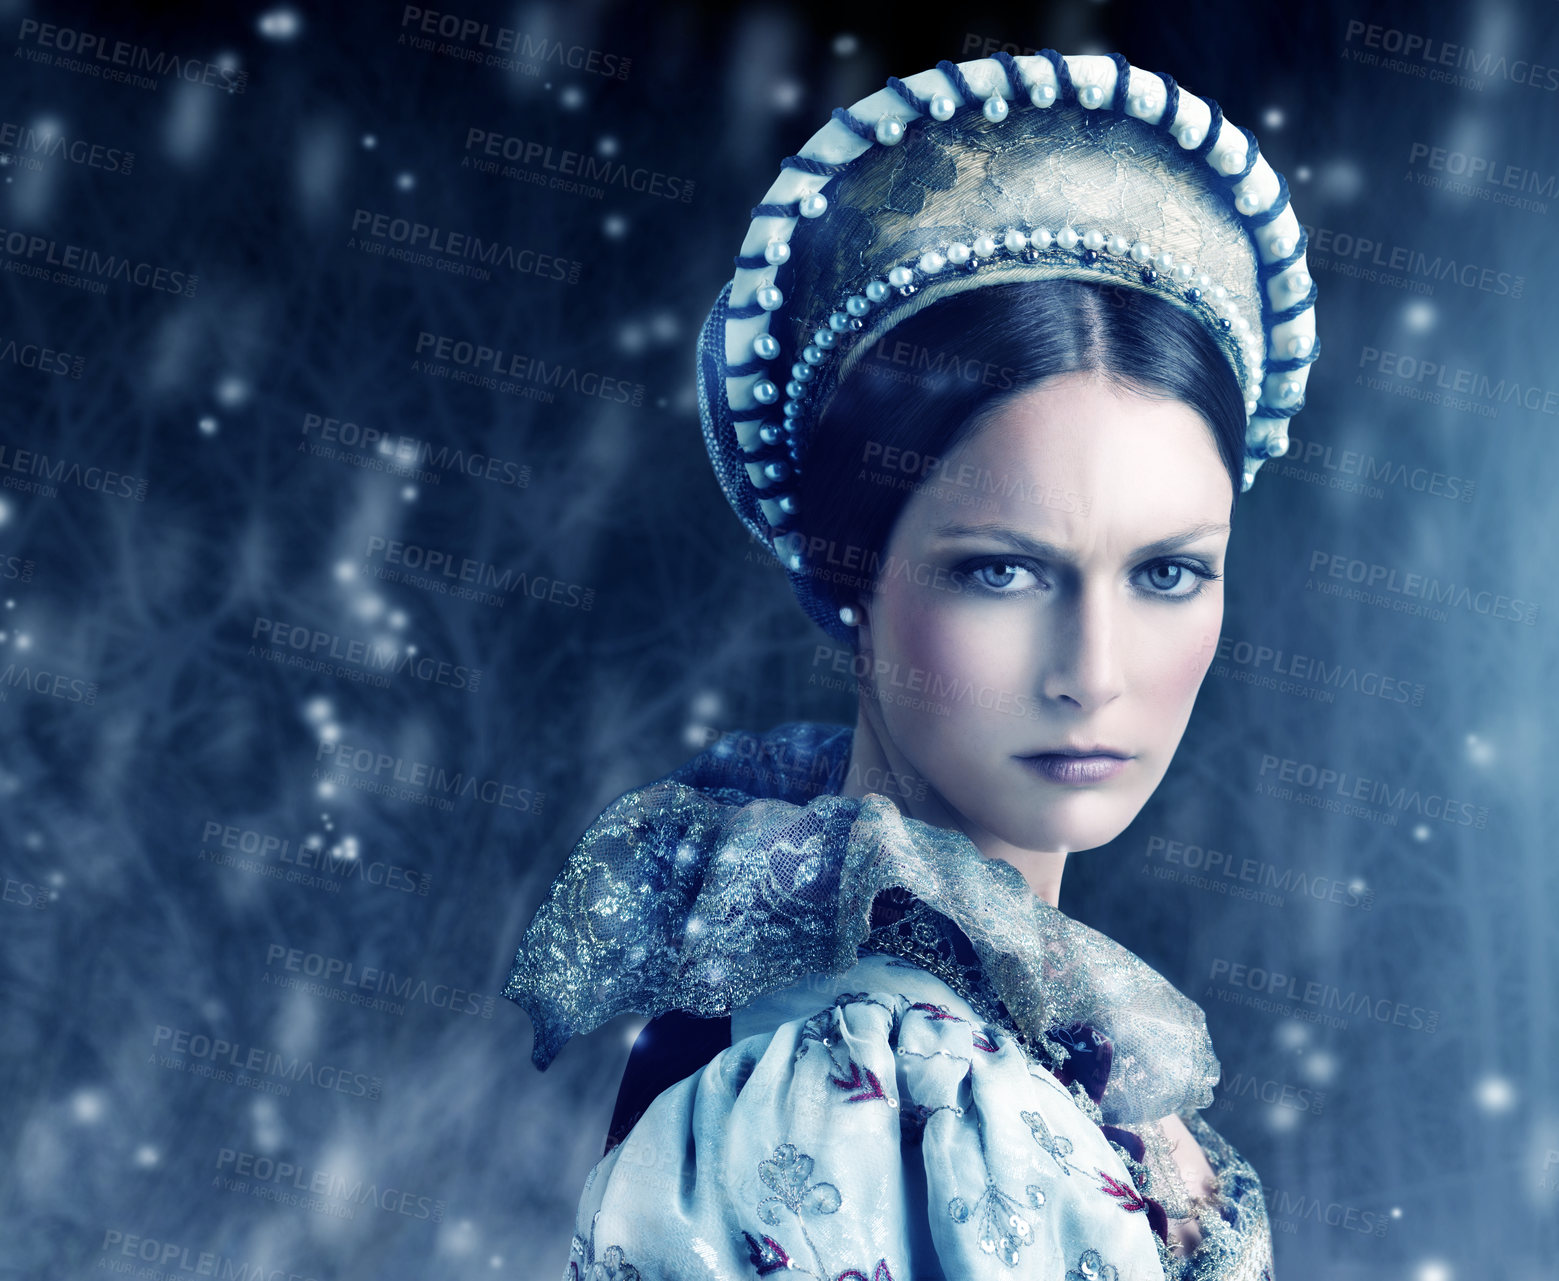 Buy stock photo Portrait of a evil-looking queen with snow falling around her